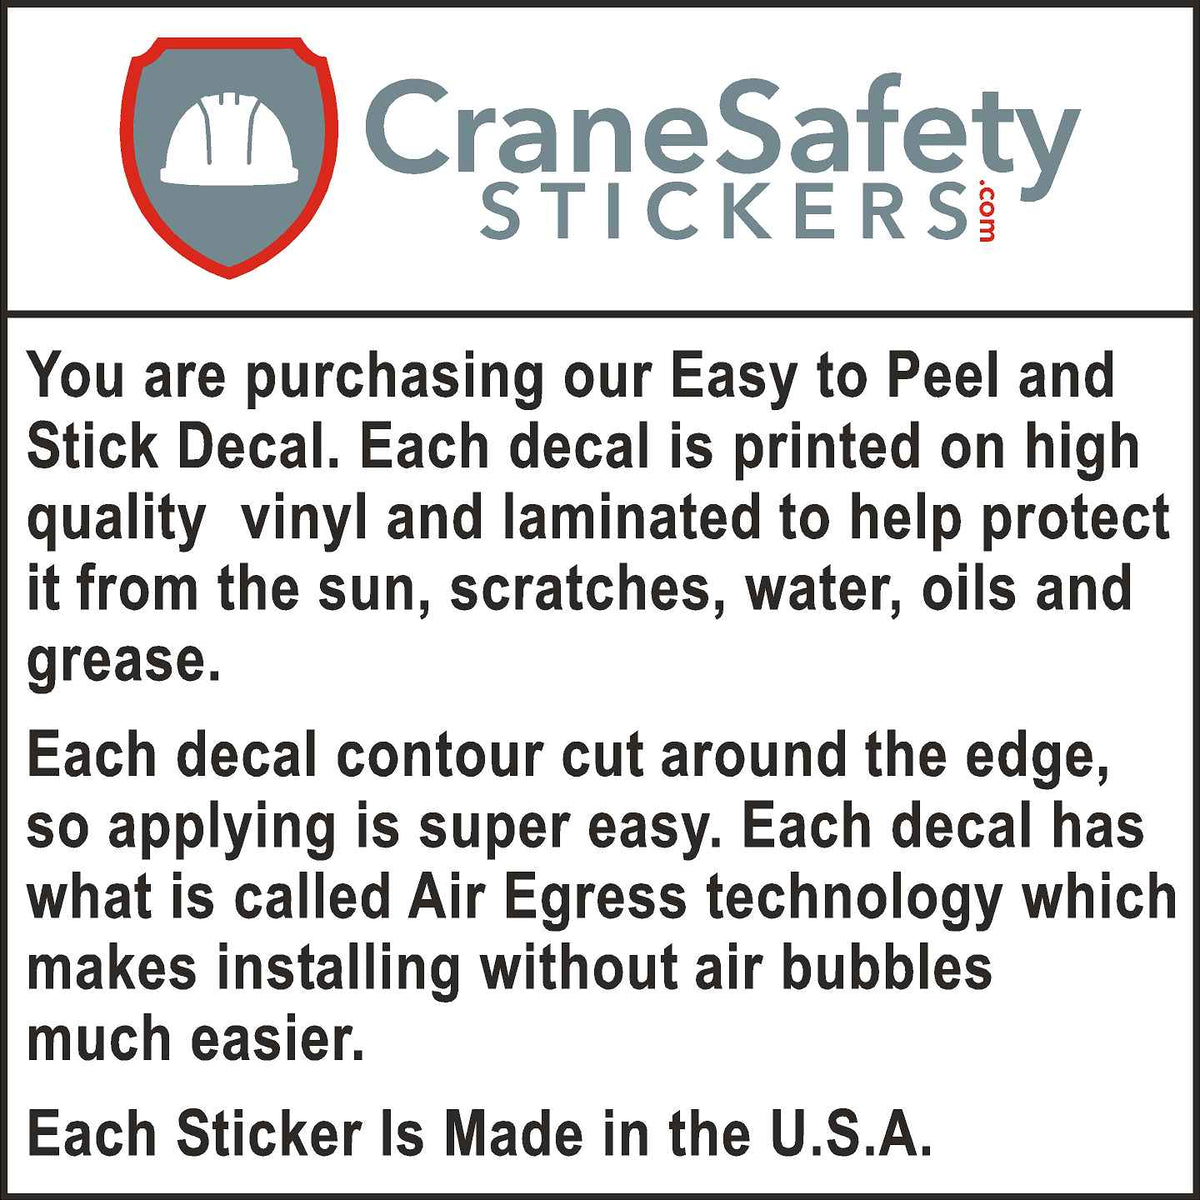 The quality of our safe worker injury free decals.